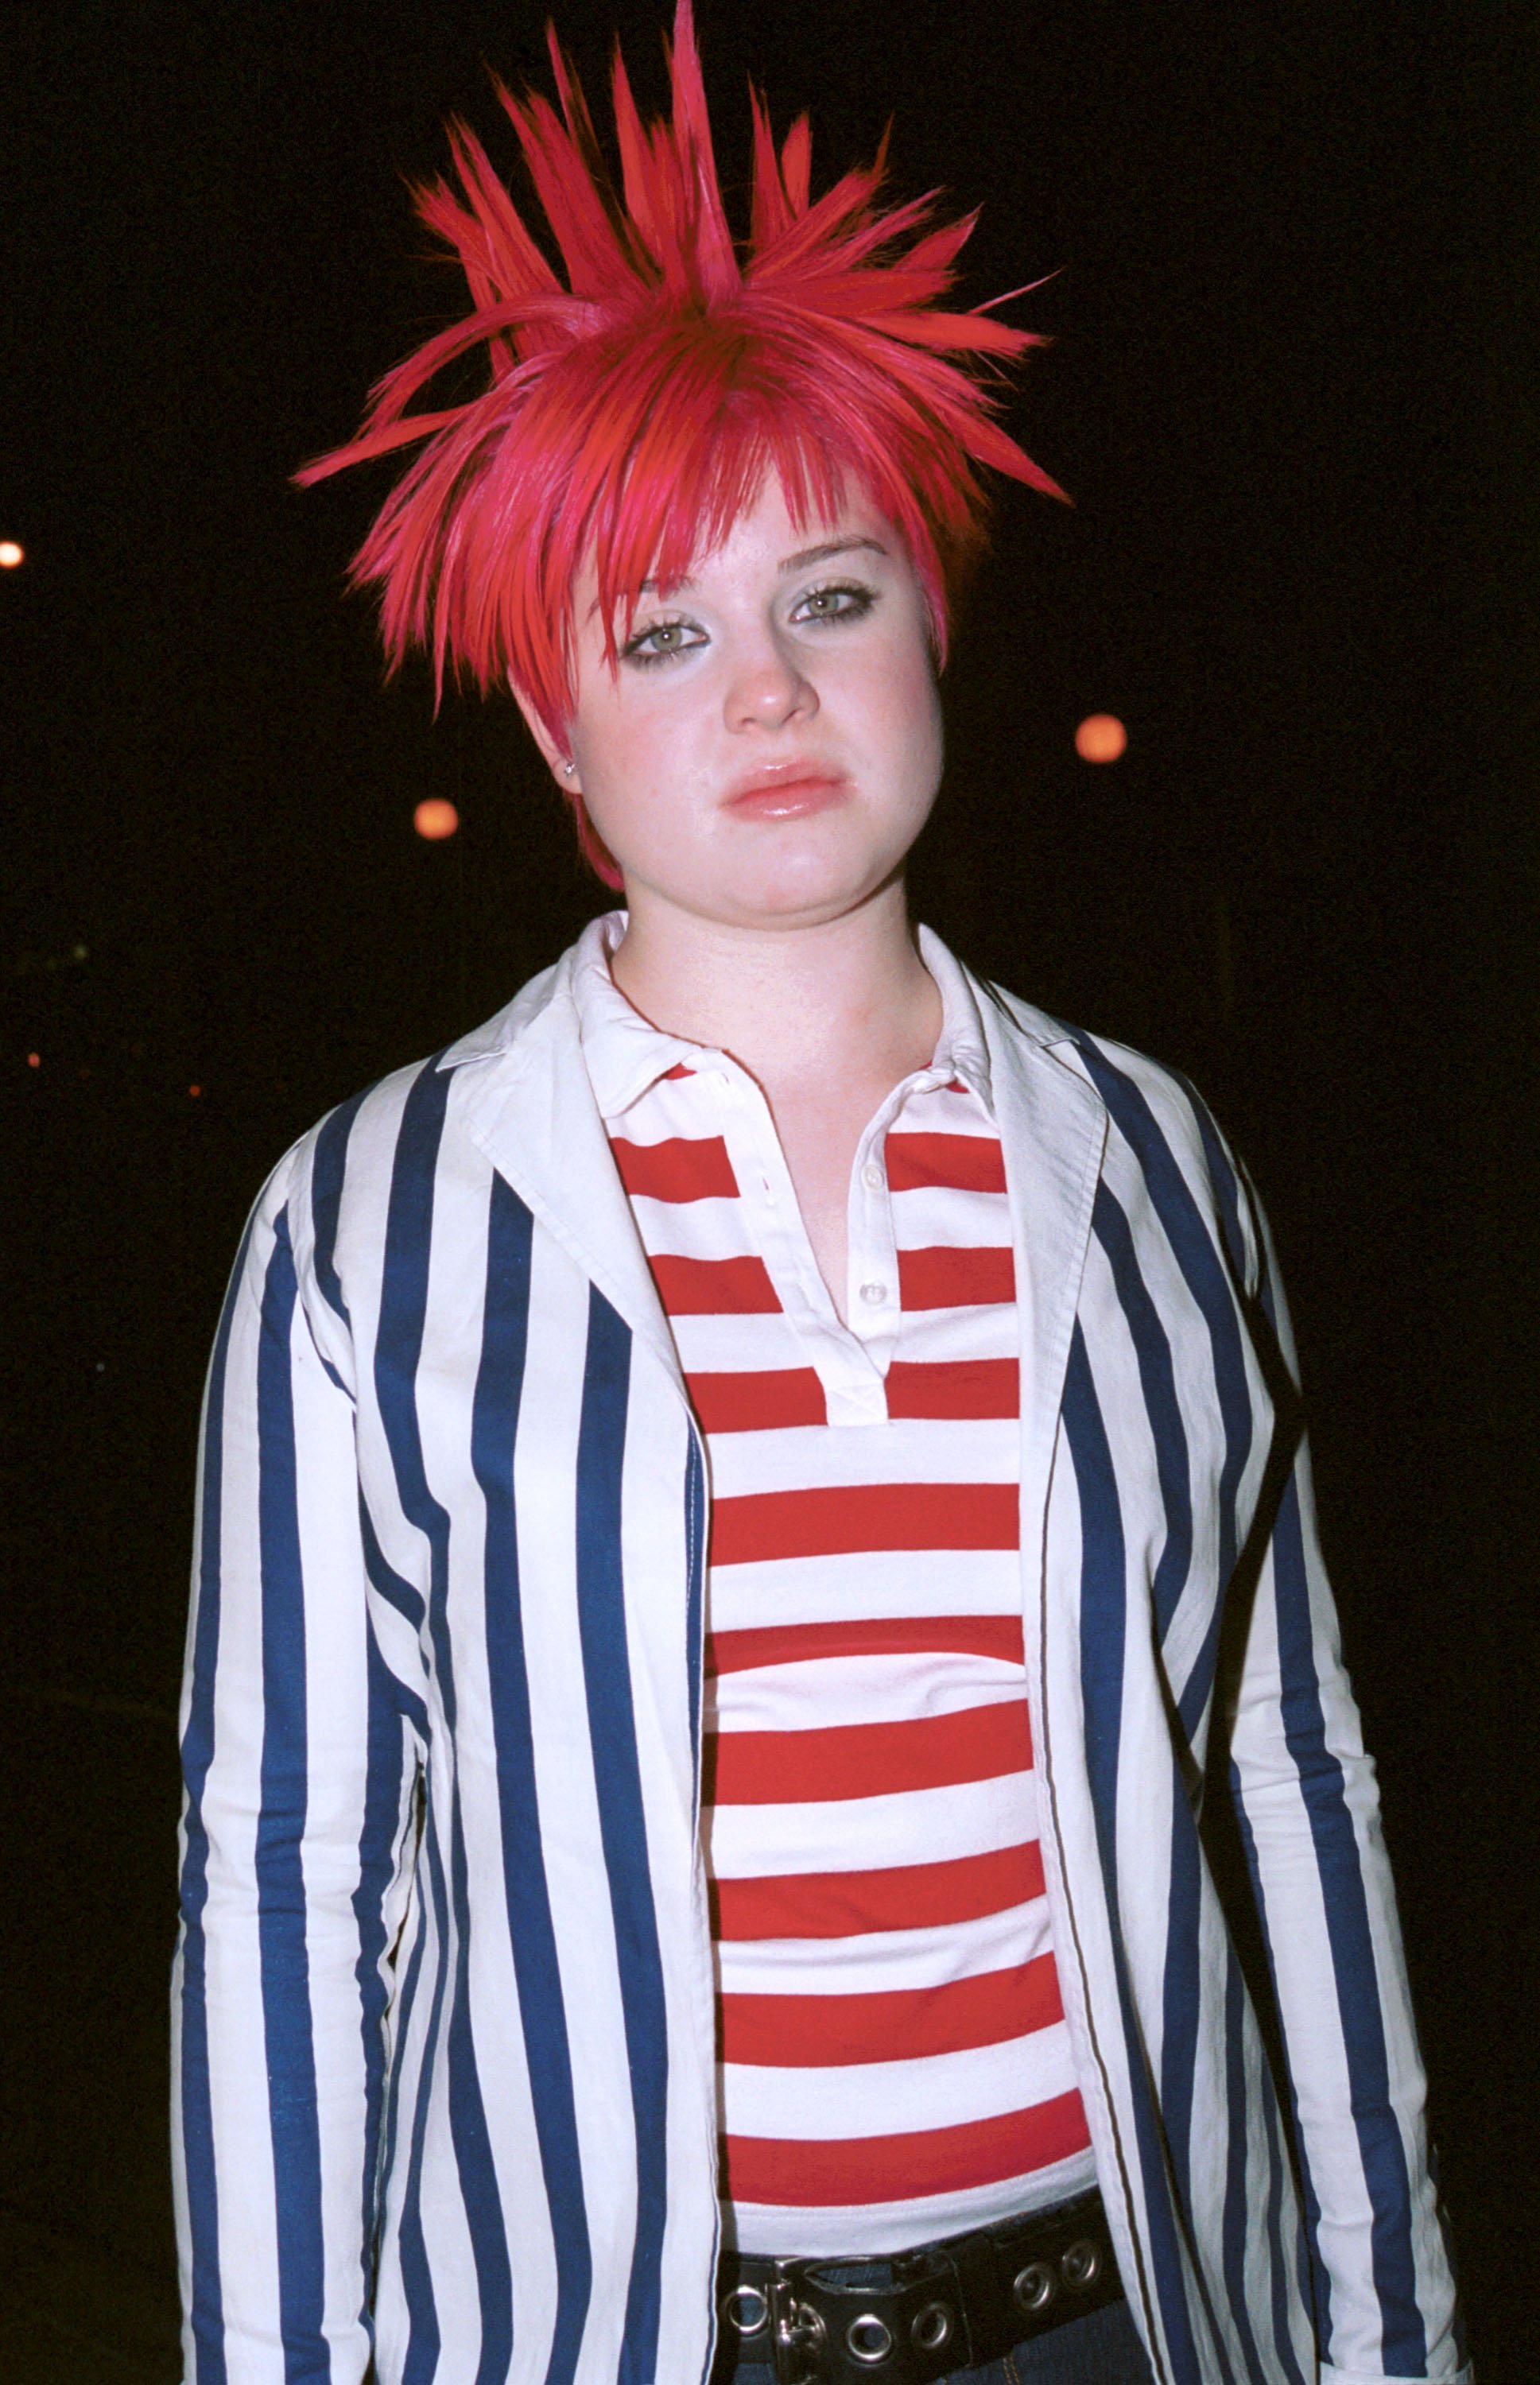 Singer Kelly Osbourne poses outside The Lounge club on March 28, 2002 in West Hollywood, California. ┃Source: Getty Images